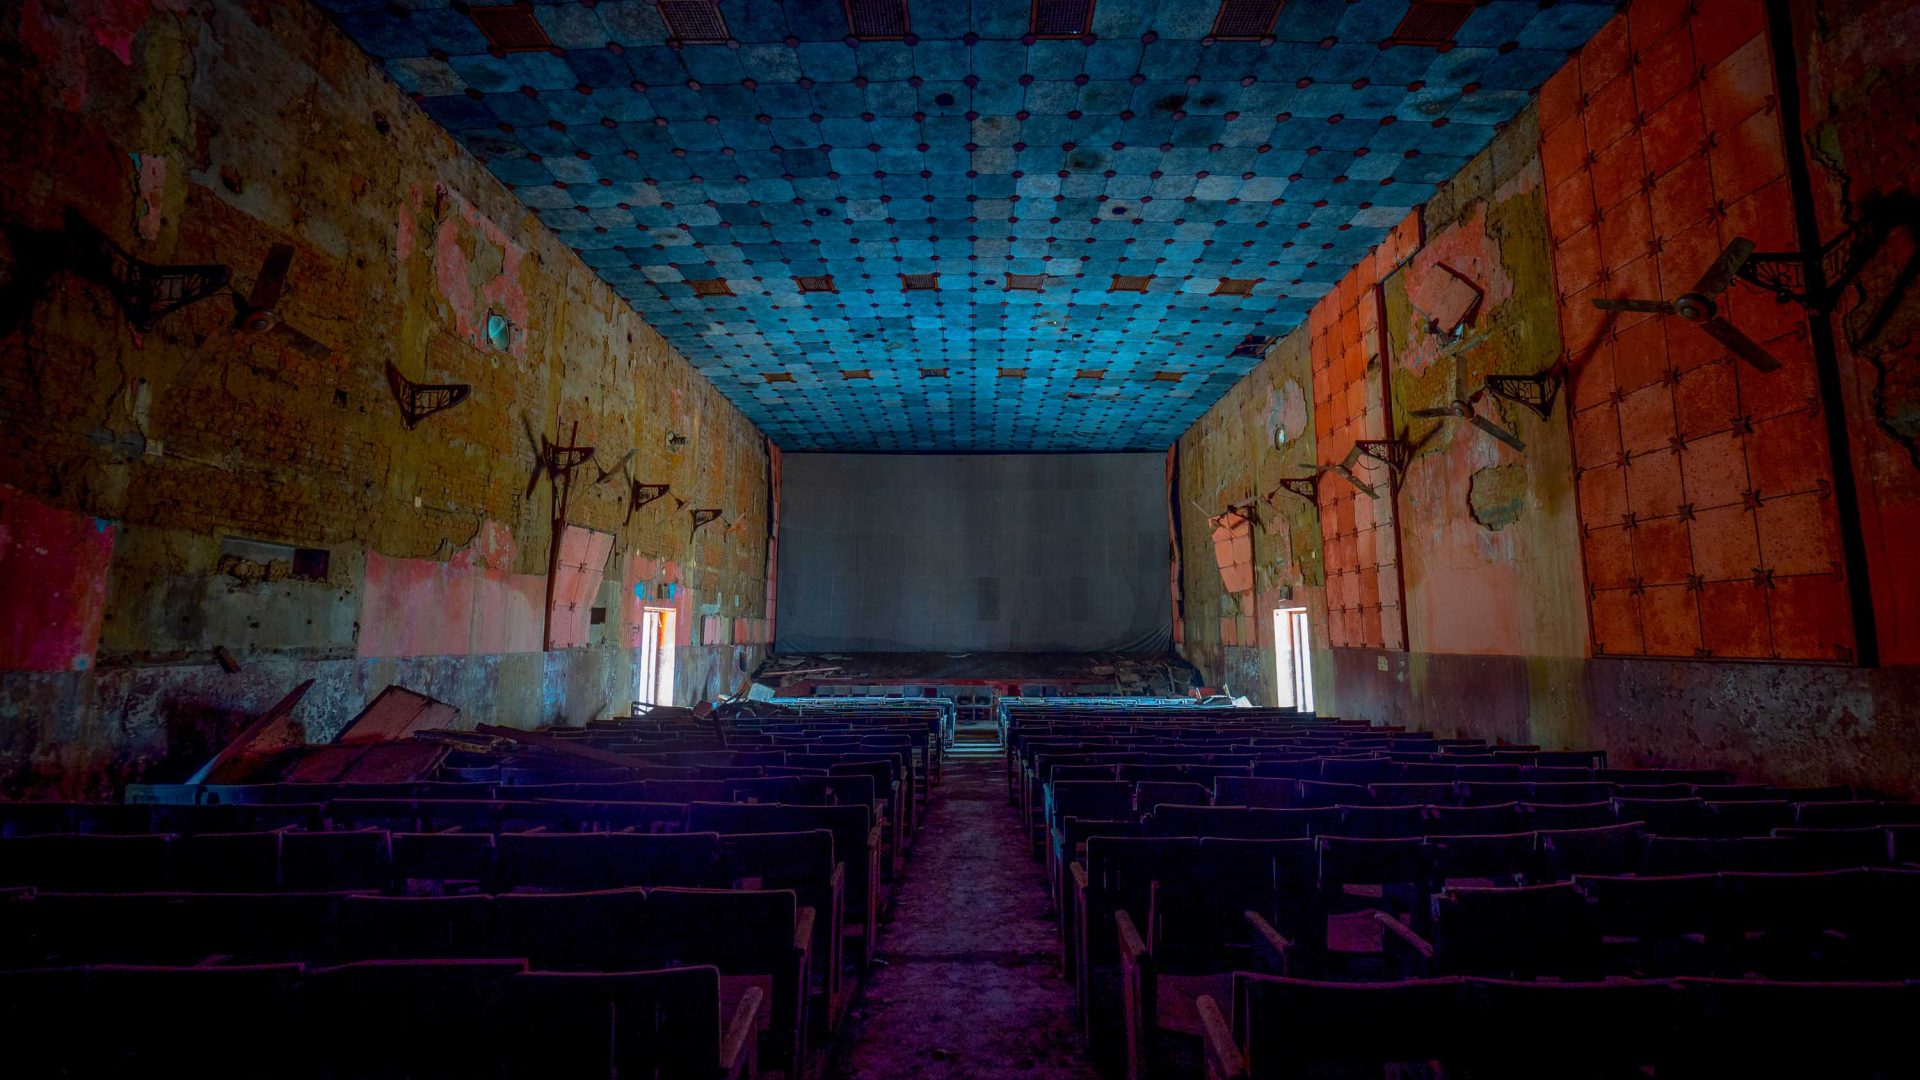 An old cinema with a blue ceiling and orange walls.